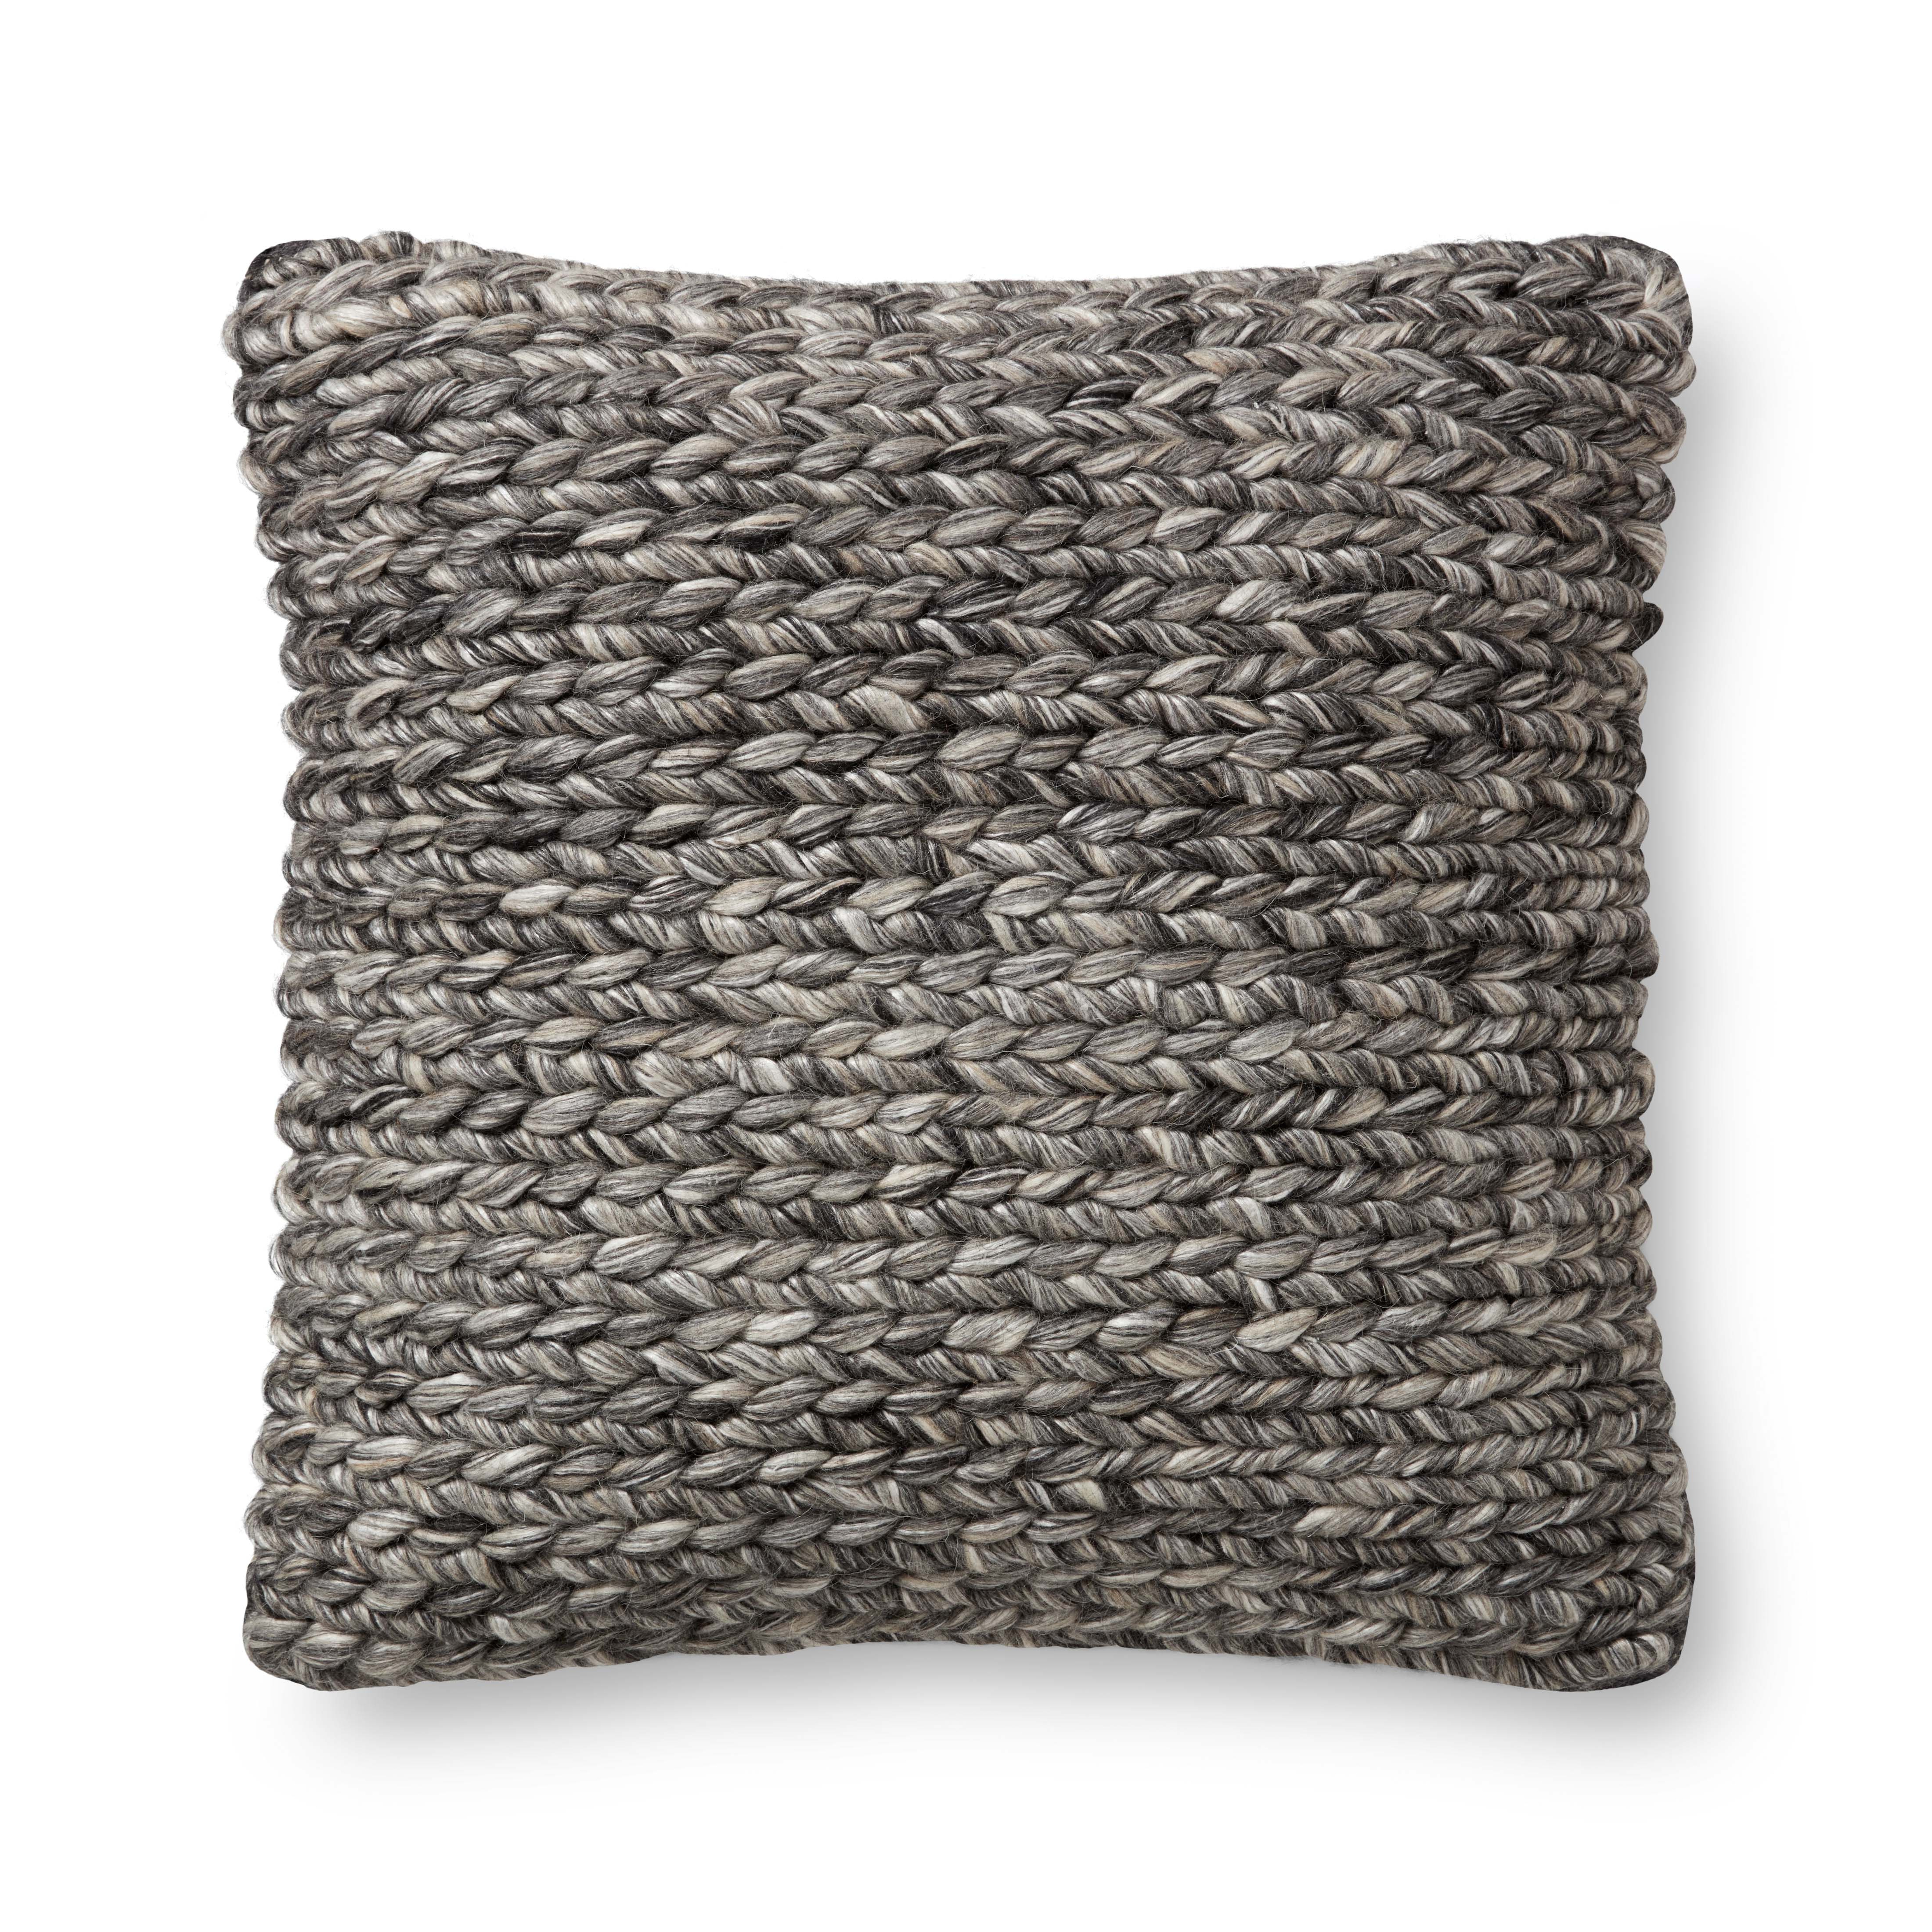 PILLOWS PED0004 CHARCOAL 22" x 22" Cover Only - ED Ellen DeGeneres Crafted by Loloi Rugs